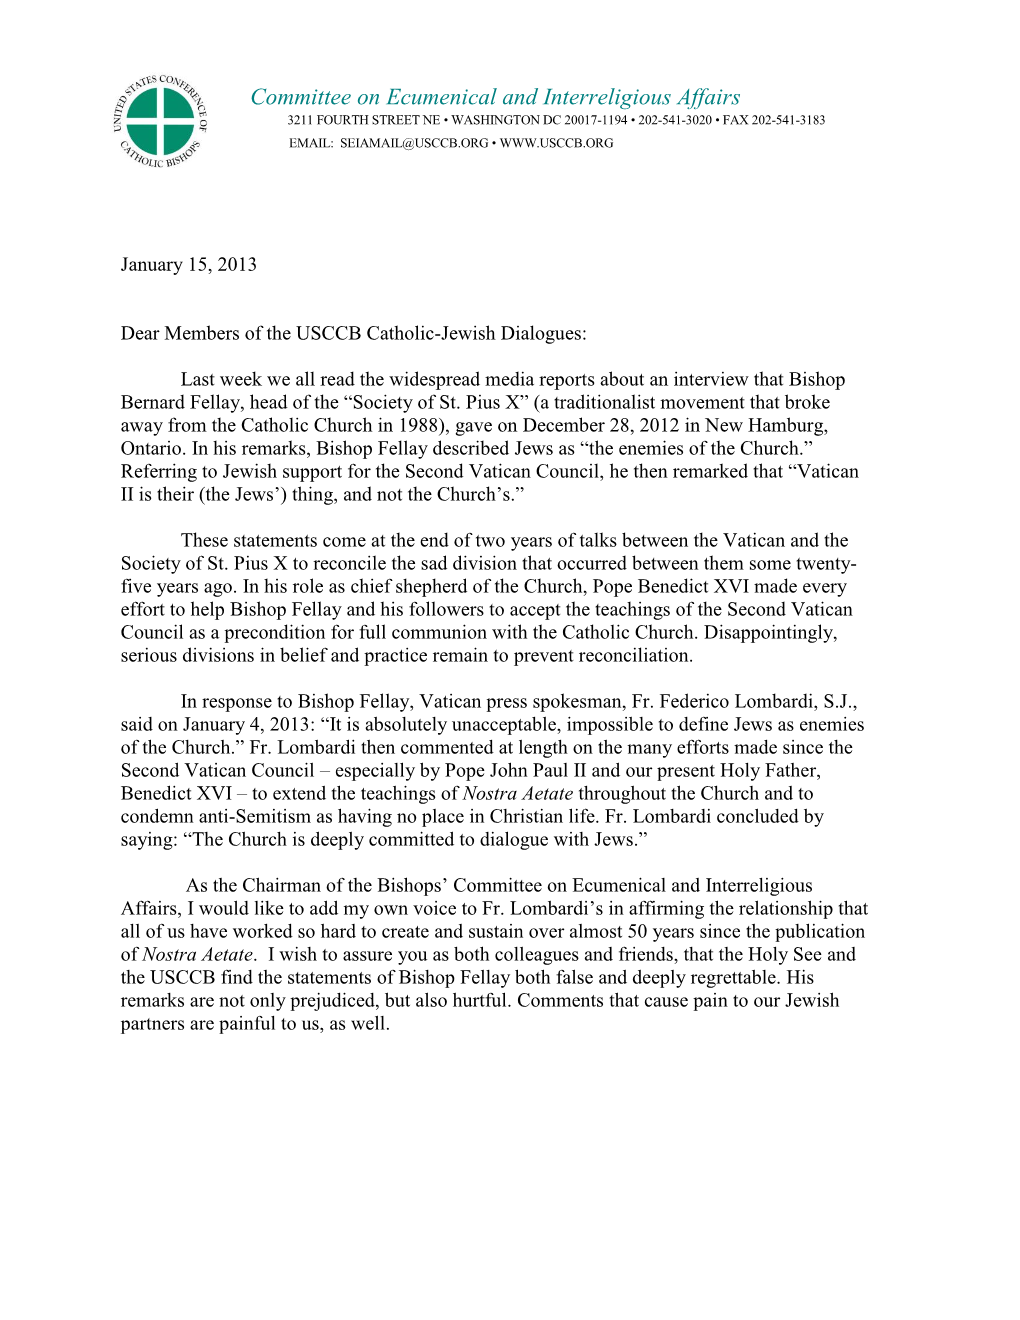 Letter from Chairman of Bishop's Committee for Ecumenical And